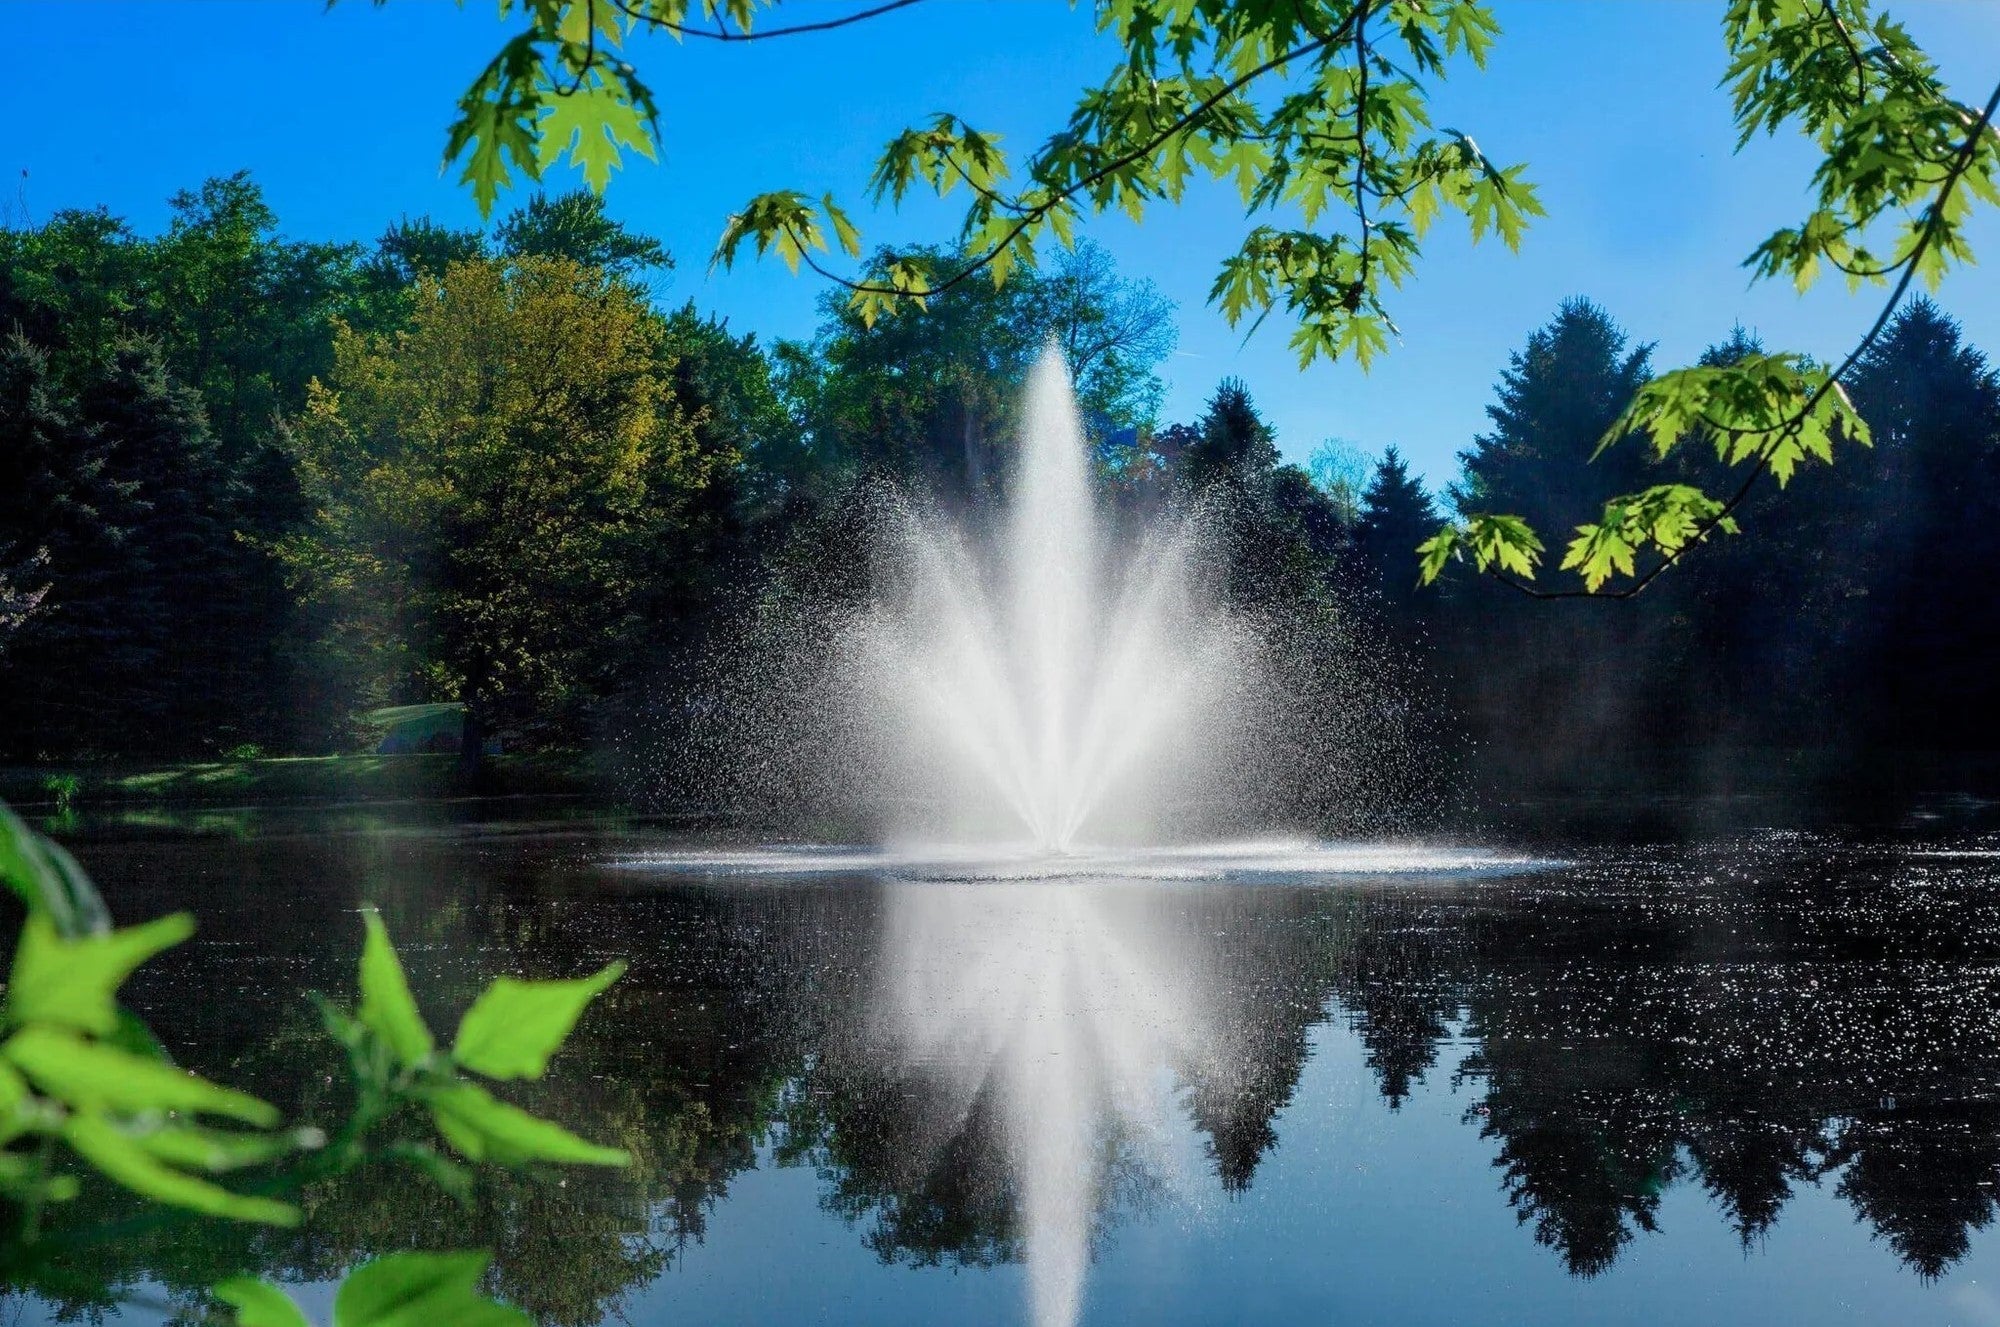 Scott Aerator Cambridge Pond Fountain  On Water Display with Trees at the background